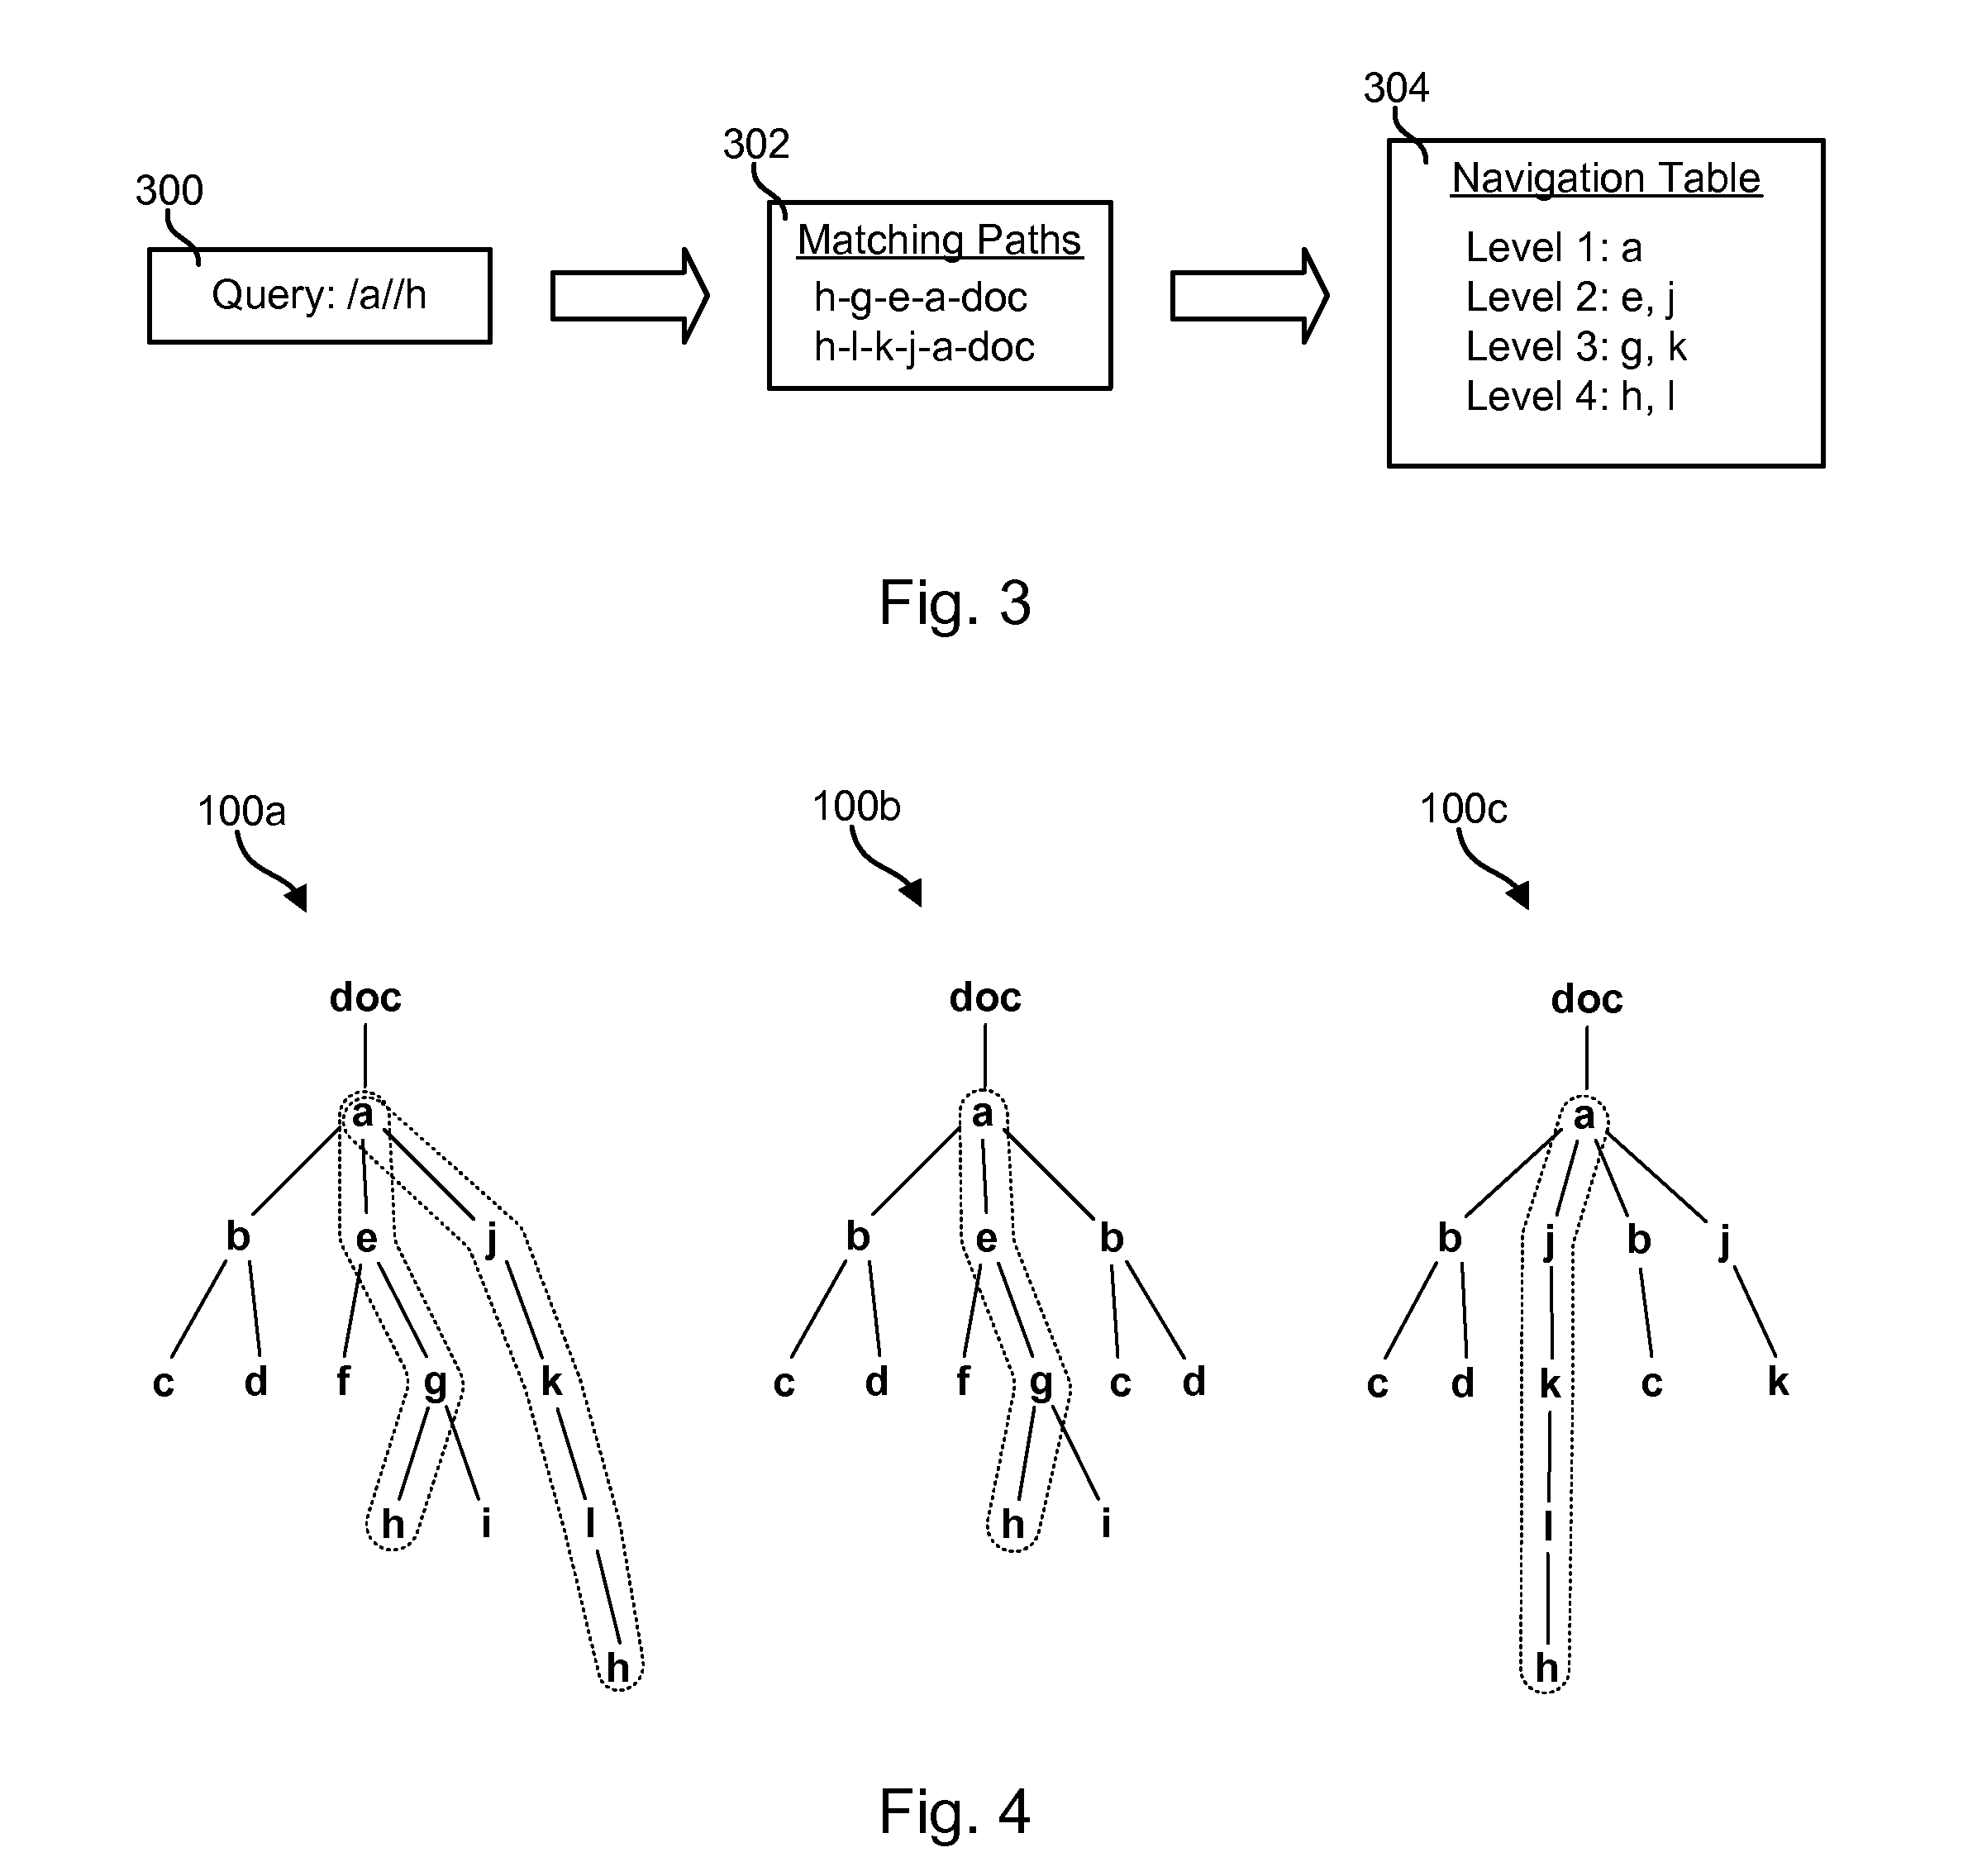 Apparatus and method for optimizing descendant path evaluation in xpath/xquery